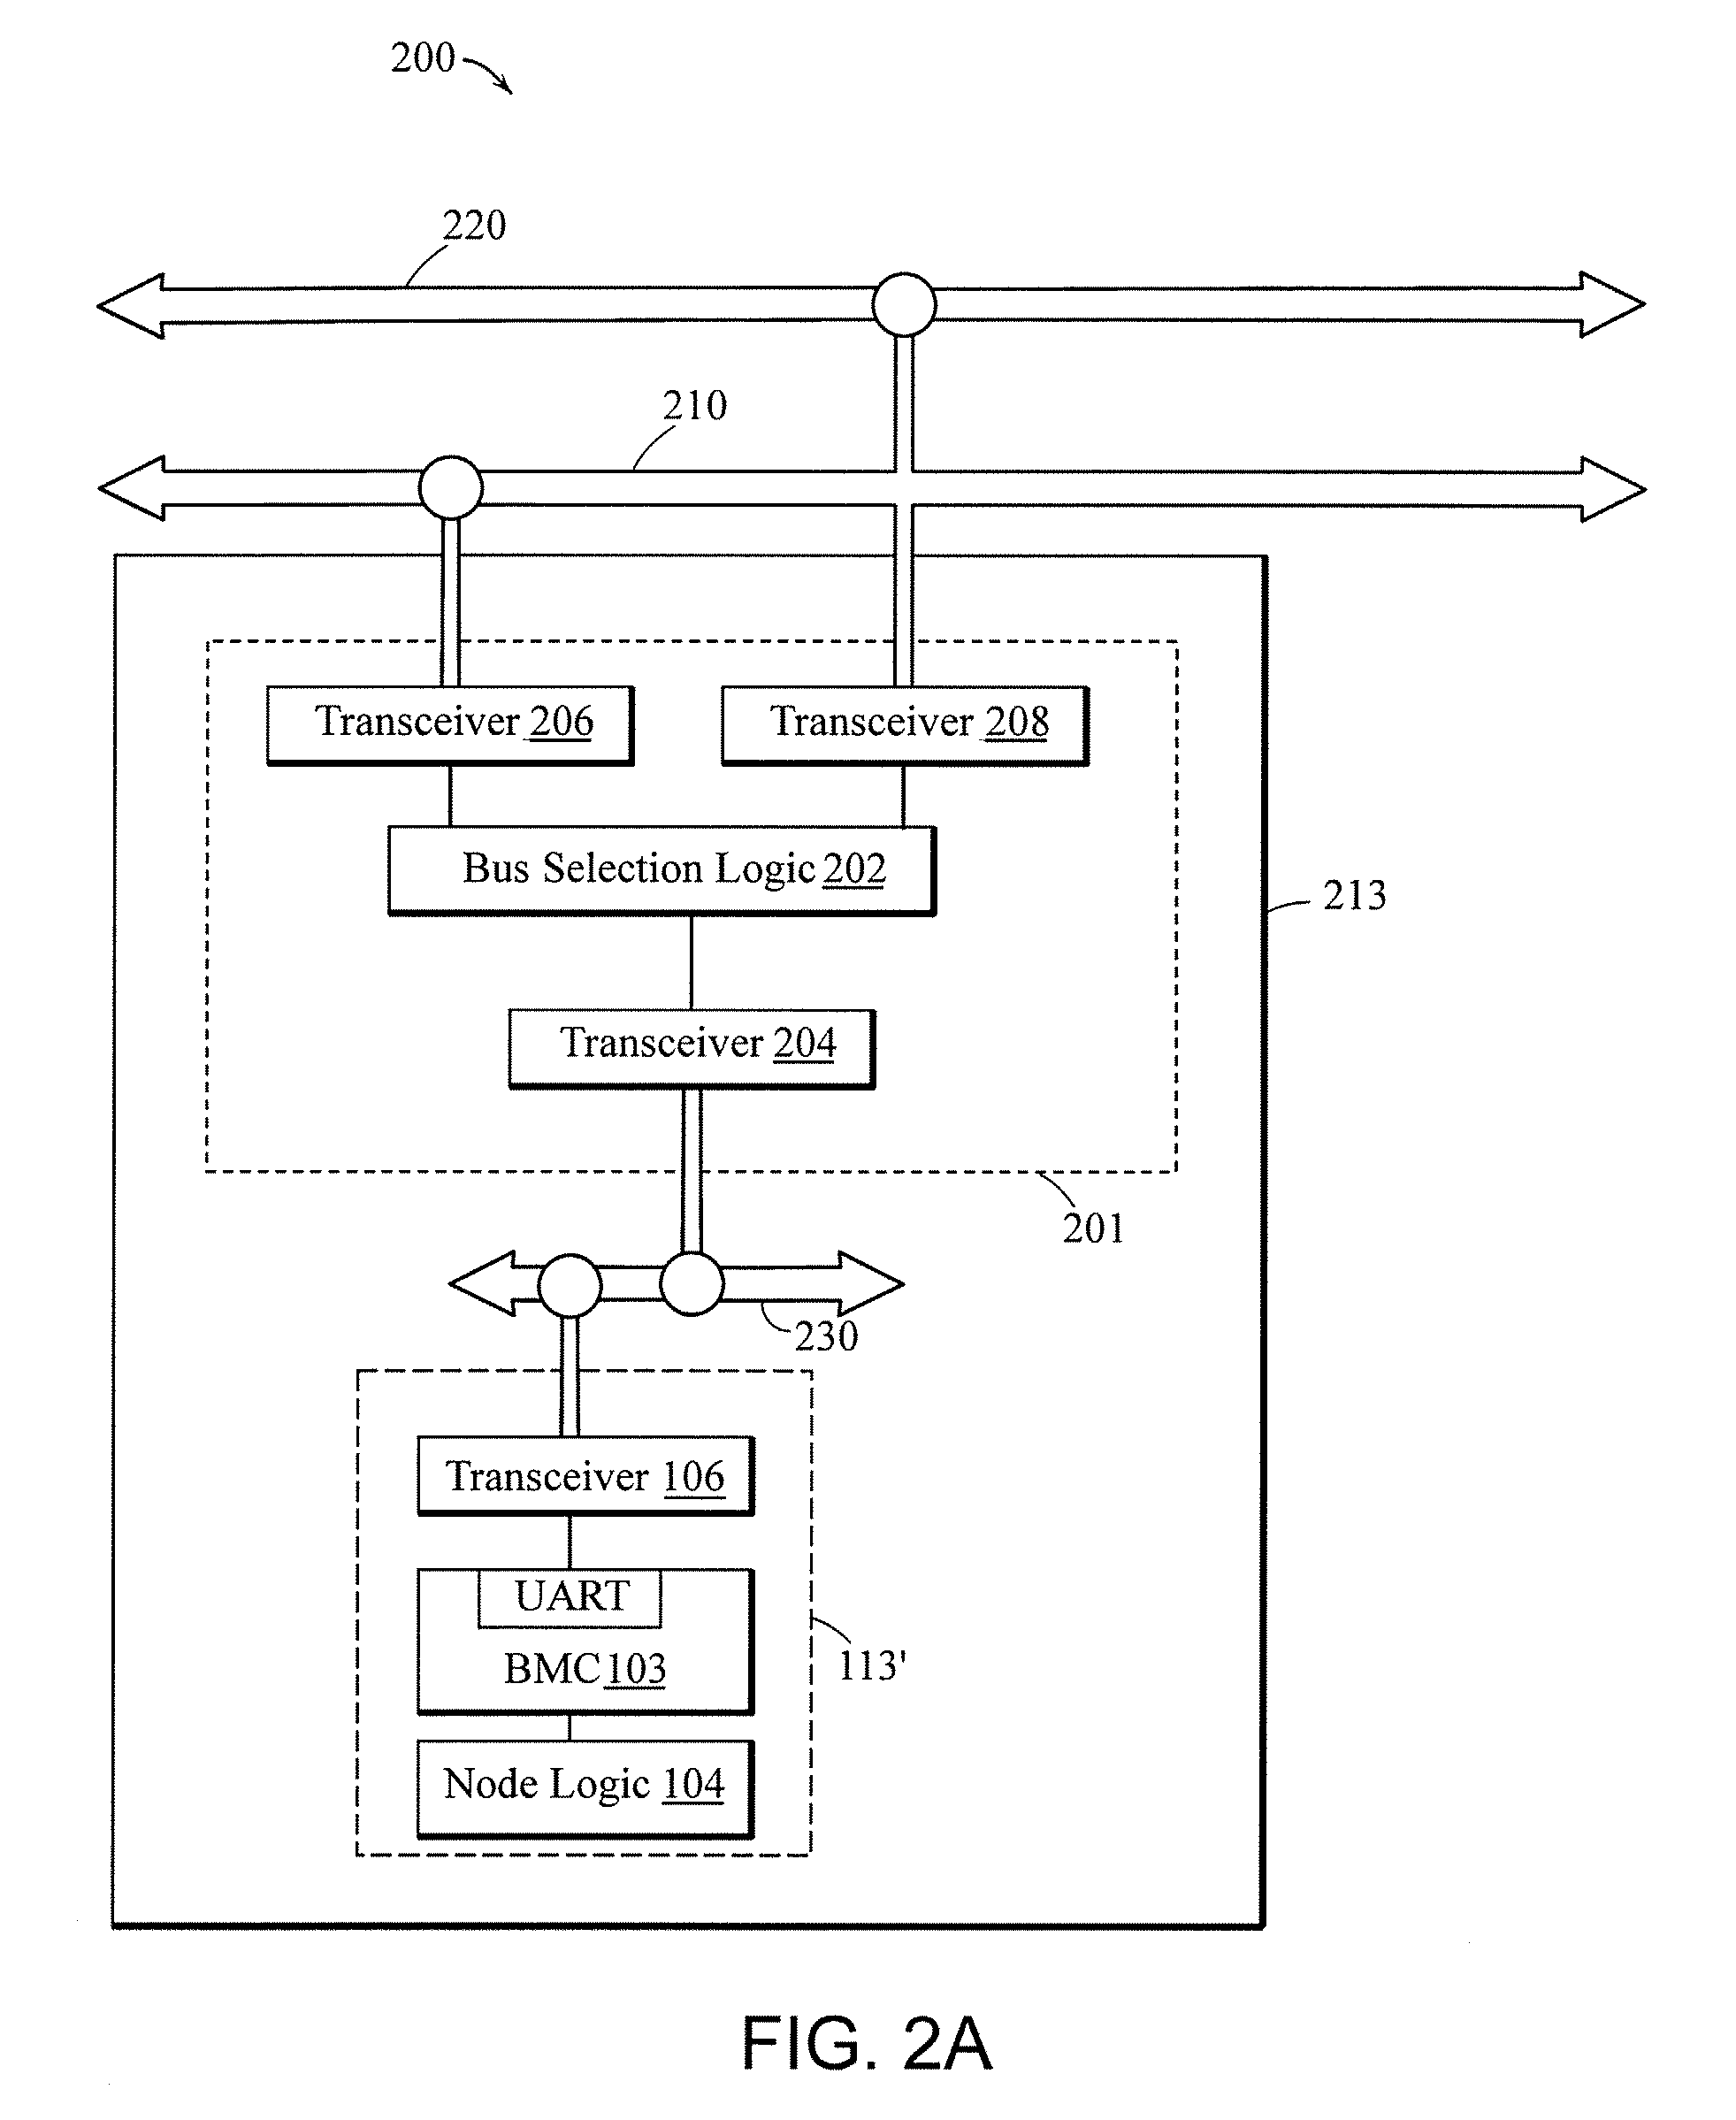 System, method, and adapter for creating fault-tolerant communication busses from standard components